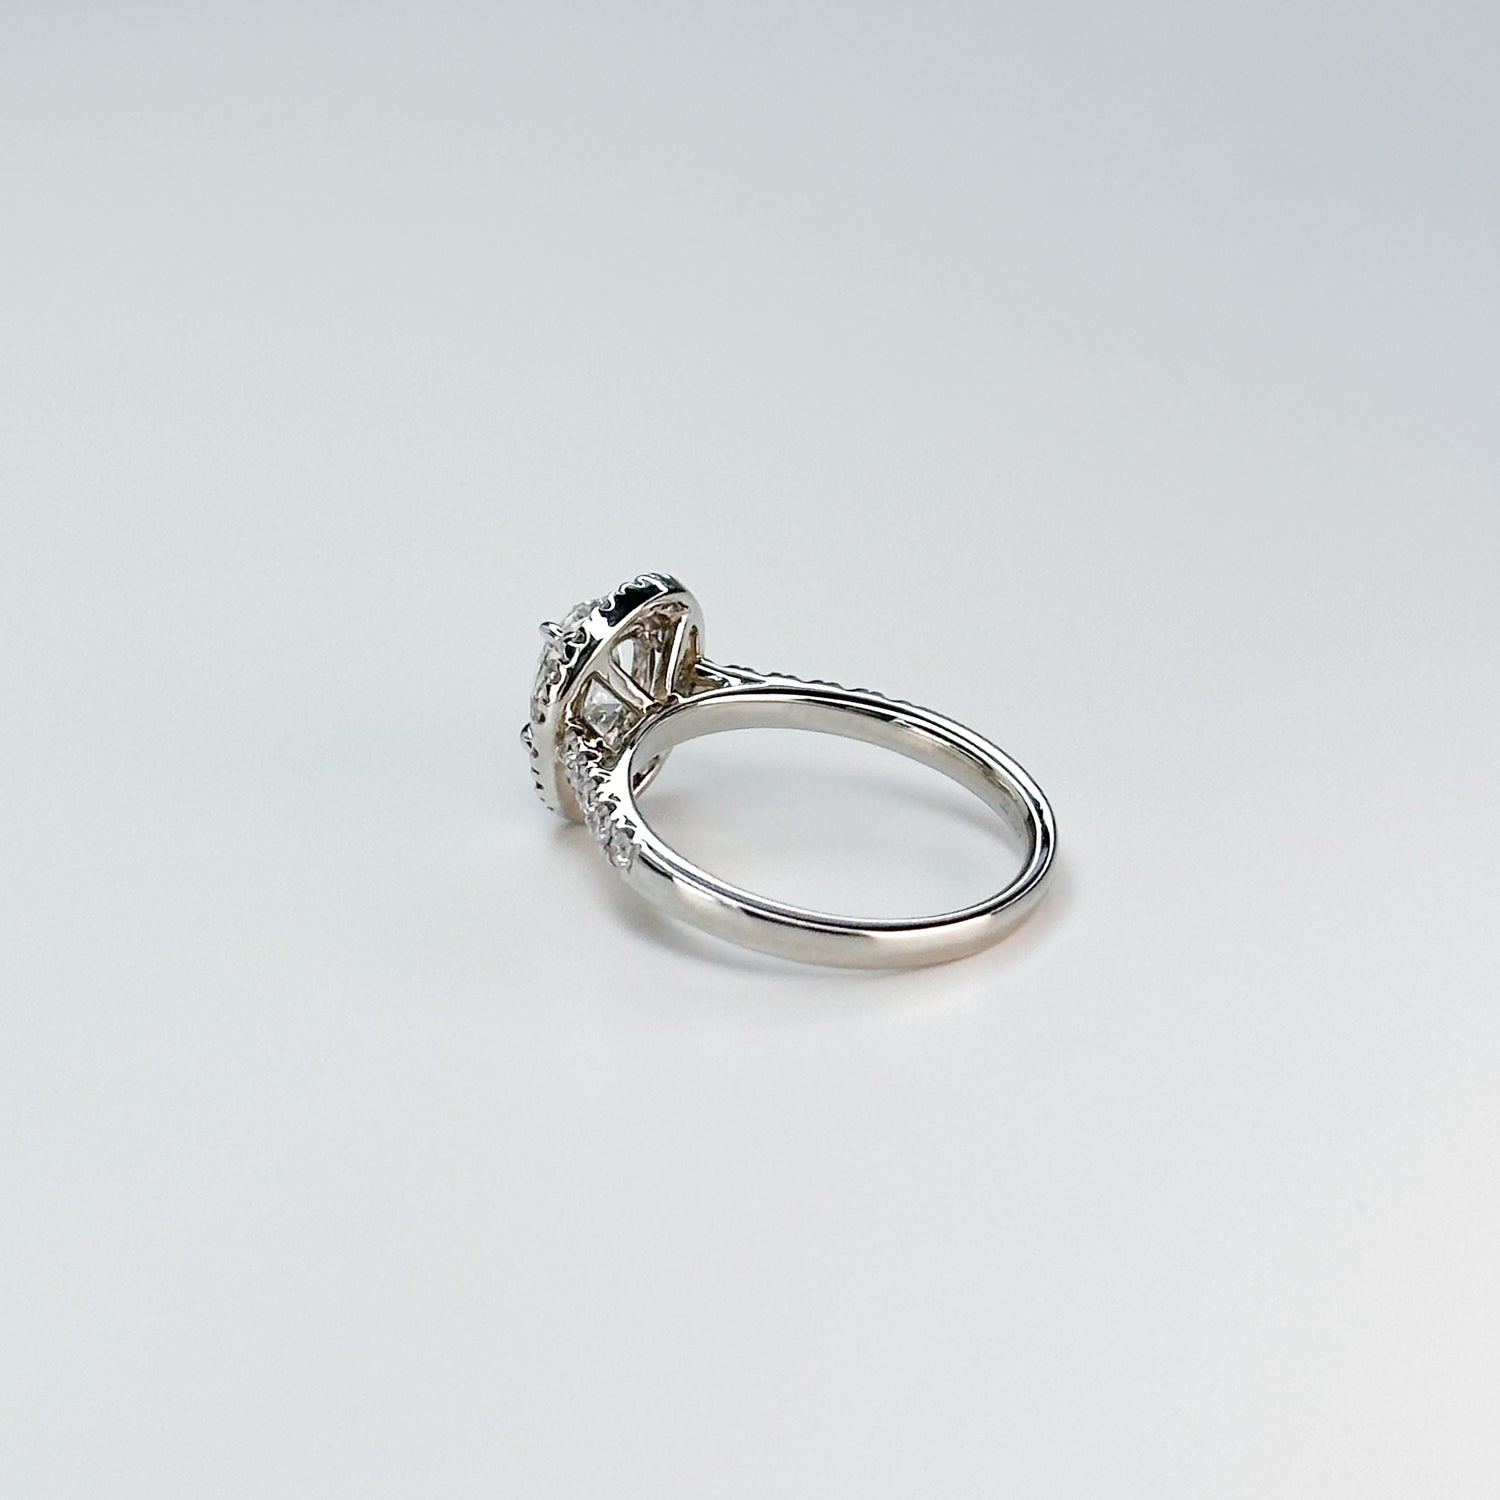 1.00ct GIA Oval Diamond Ring with Halo